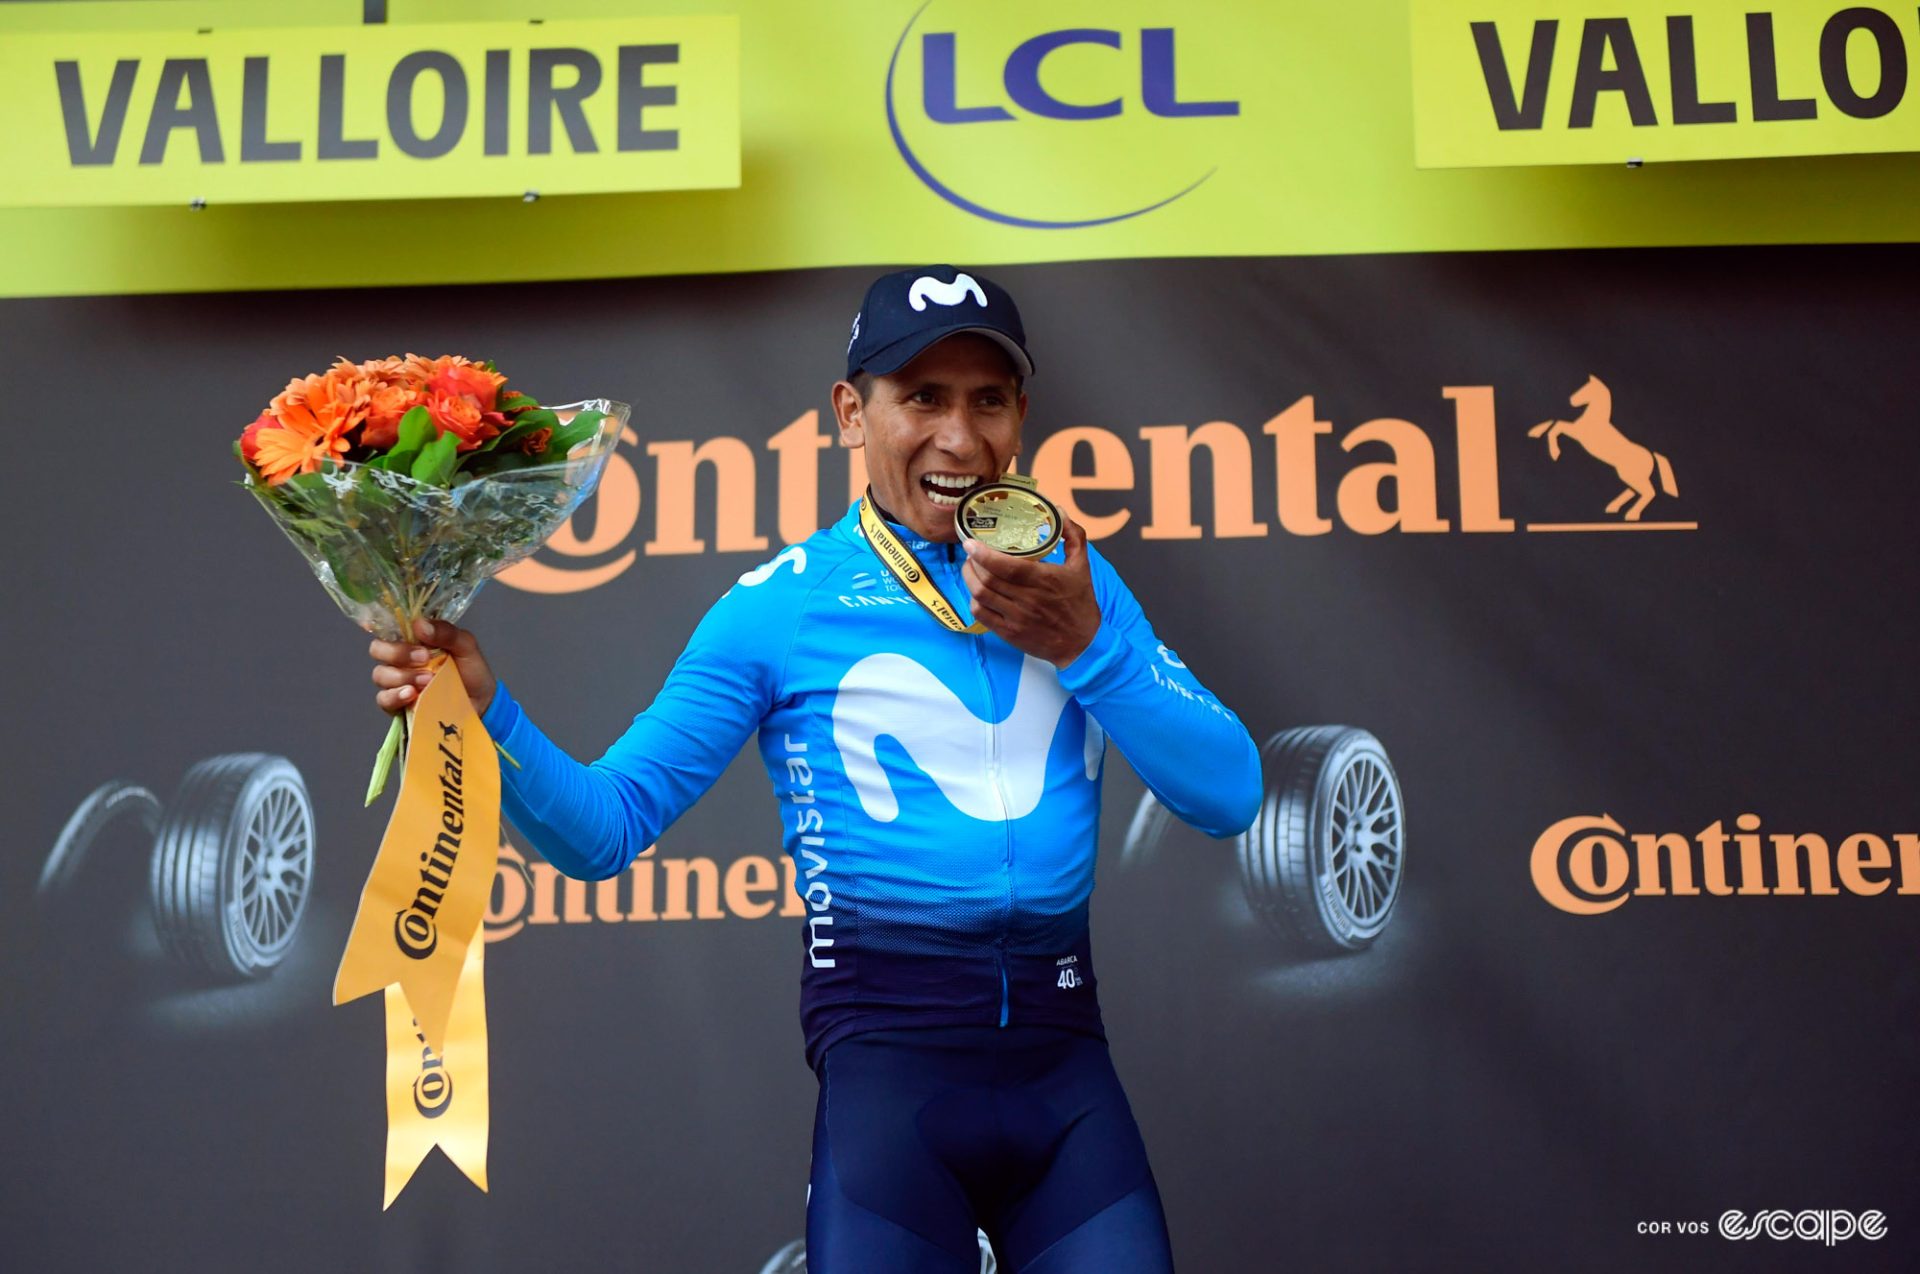 Nairo Quintana on the podium at the 2019 Tour de France having won the stage into Valloire. He is biting a winner's medal and smiling. 